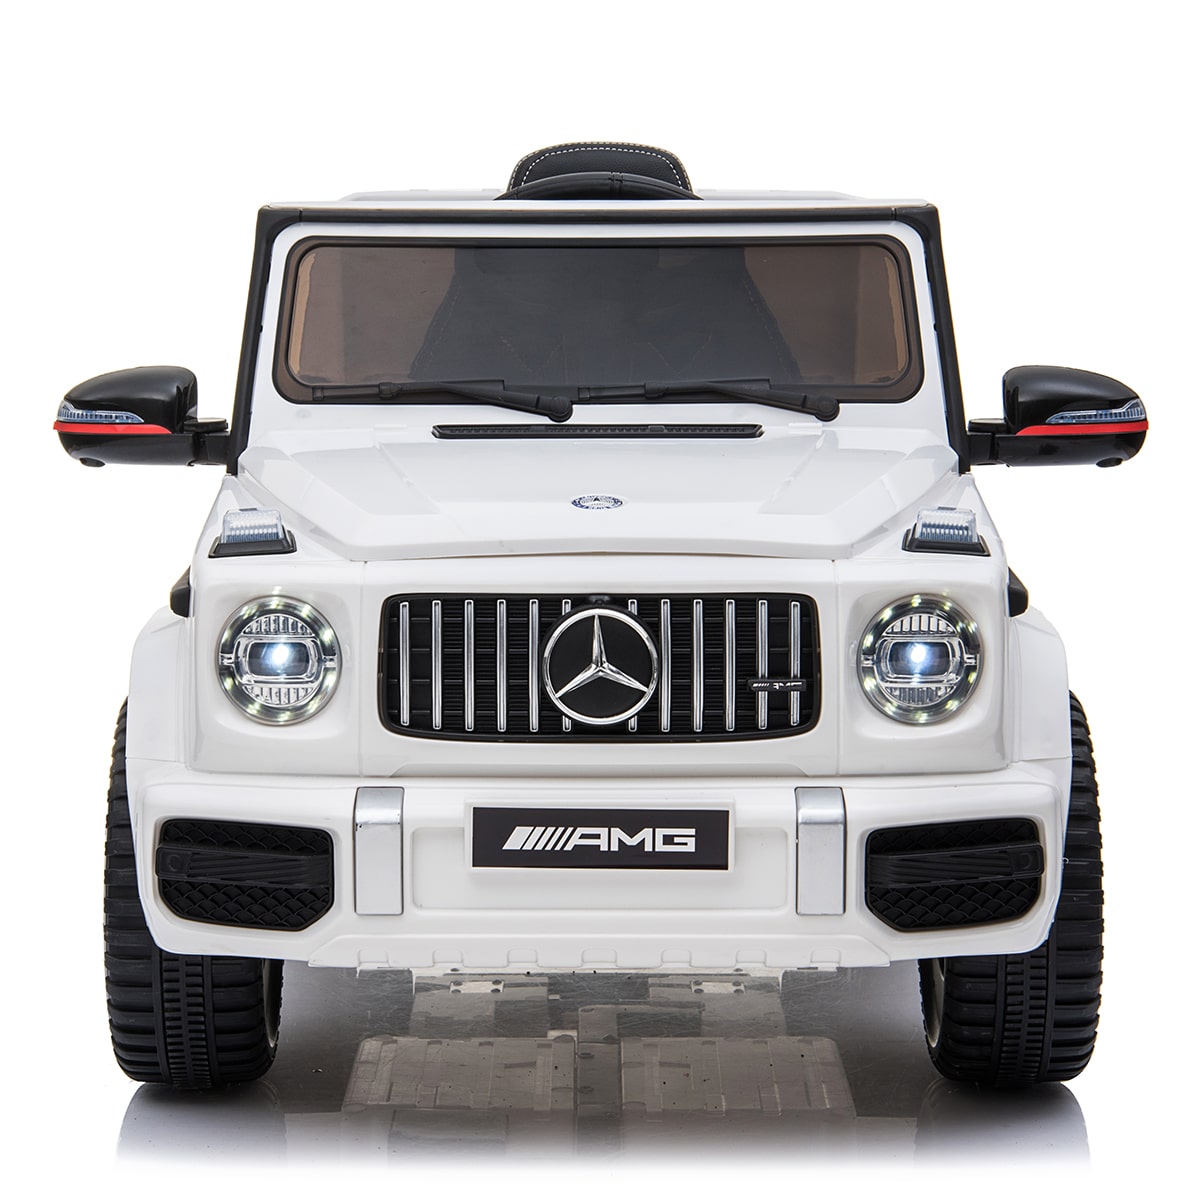 "White Mercedes-Benz G63 AMG 12-Volt Electric Ride-on Car for Kids on a Neutral Background"